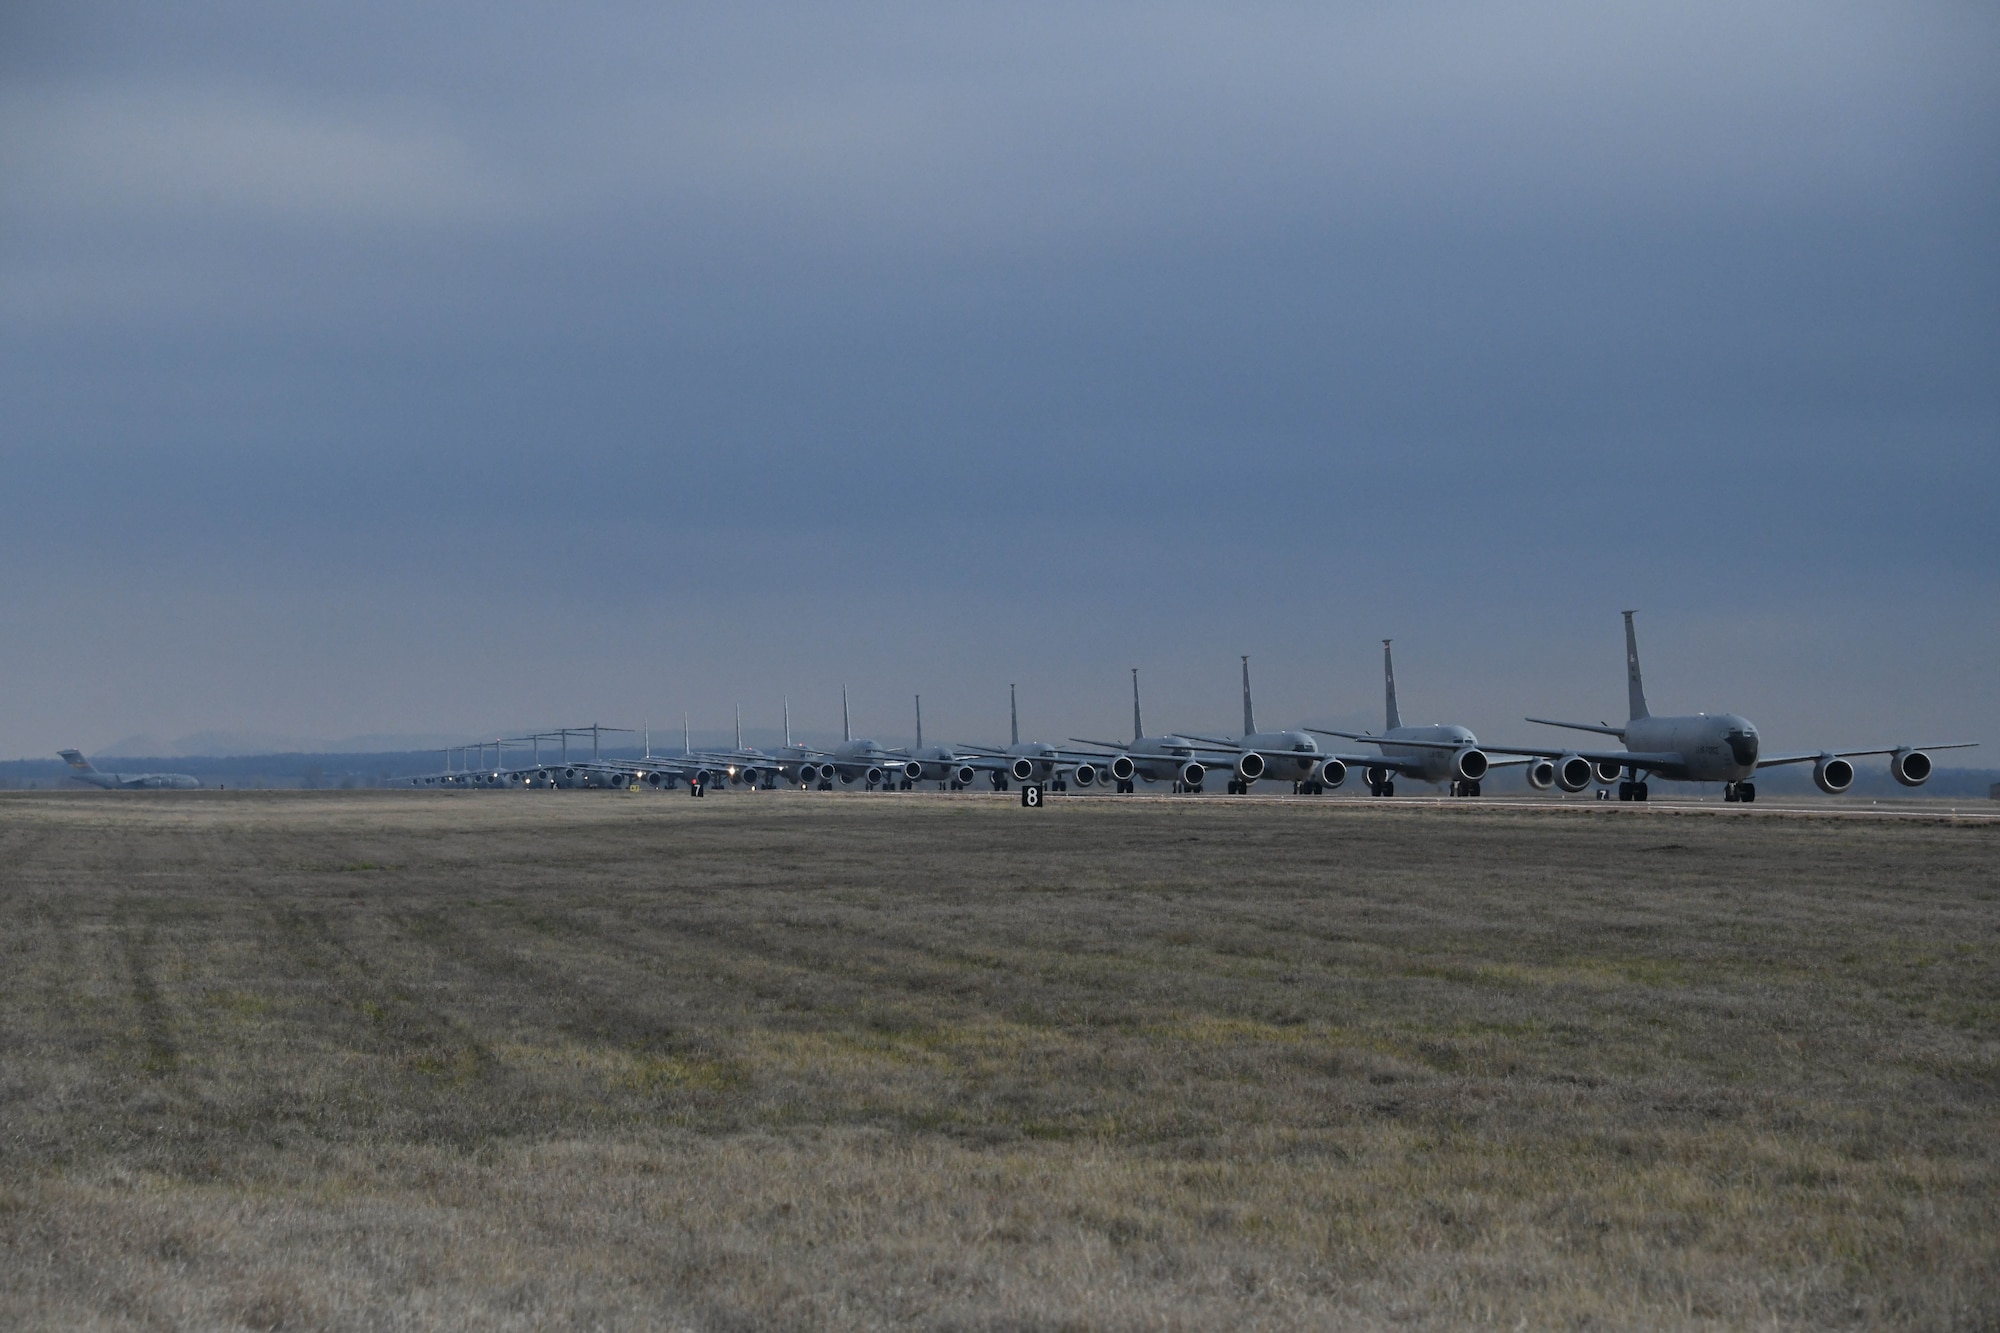 C-17 Globemaster III and KC-46 Pegasus aircraft taxi down the runway at Altus Air Force Base, Oklahoma, during a large force exercise, March 24, 2023. This exercise served as an opportunity for members from all groups to conduct training in the event aircraft need to evacuate the base during a severe weather event. (U.S. Air Force photo by 1st Lt. Elisabeth Teitelman)